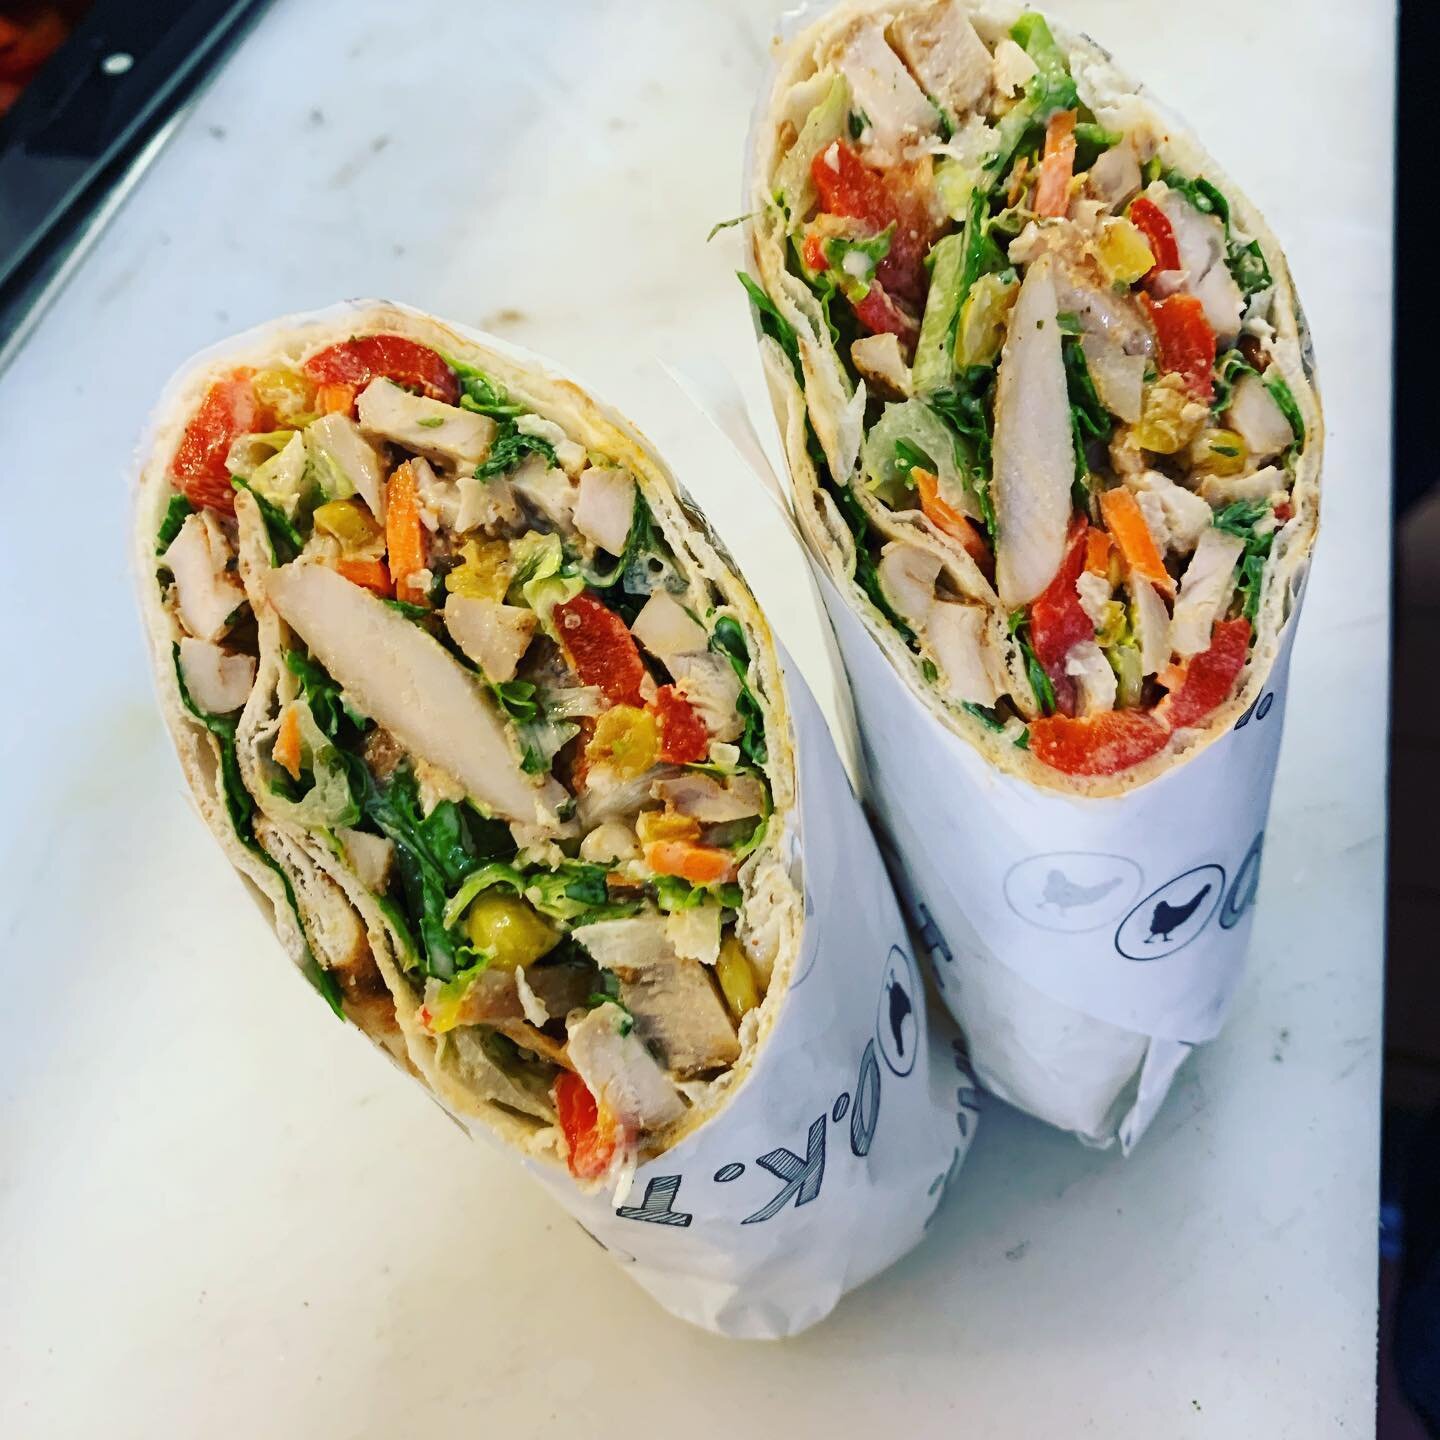 Try our new Asian Chicken Wrap!! (Veggie version also avail!)

On the daily menu offered Tues-Thurs.
.
.
@hillelatucla @ourkoshertable 
#kosherfoodie #yummy #lunchtime